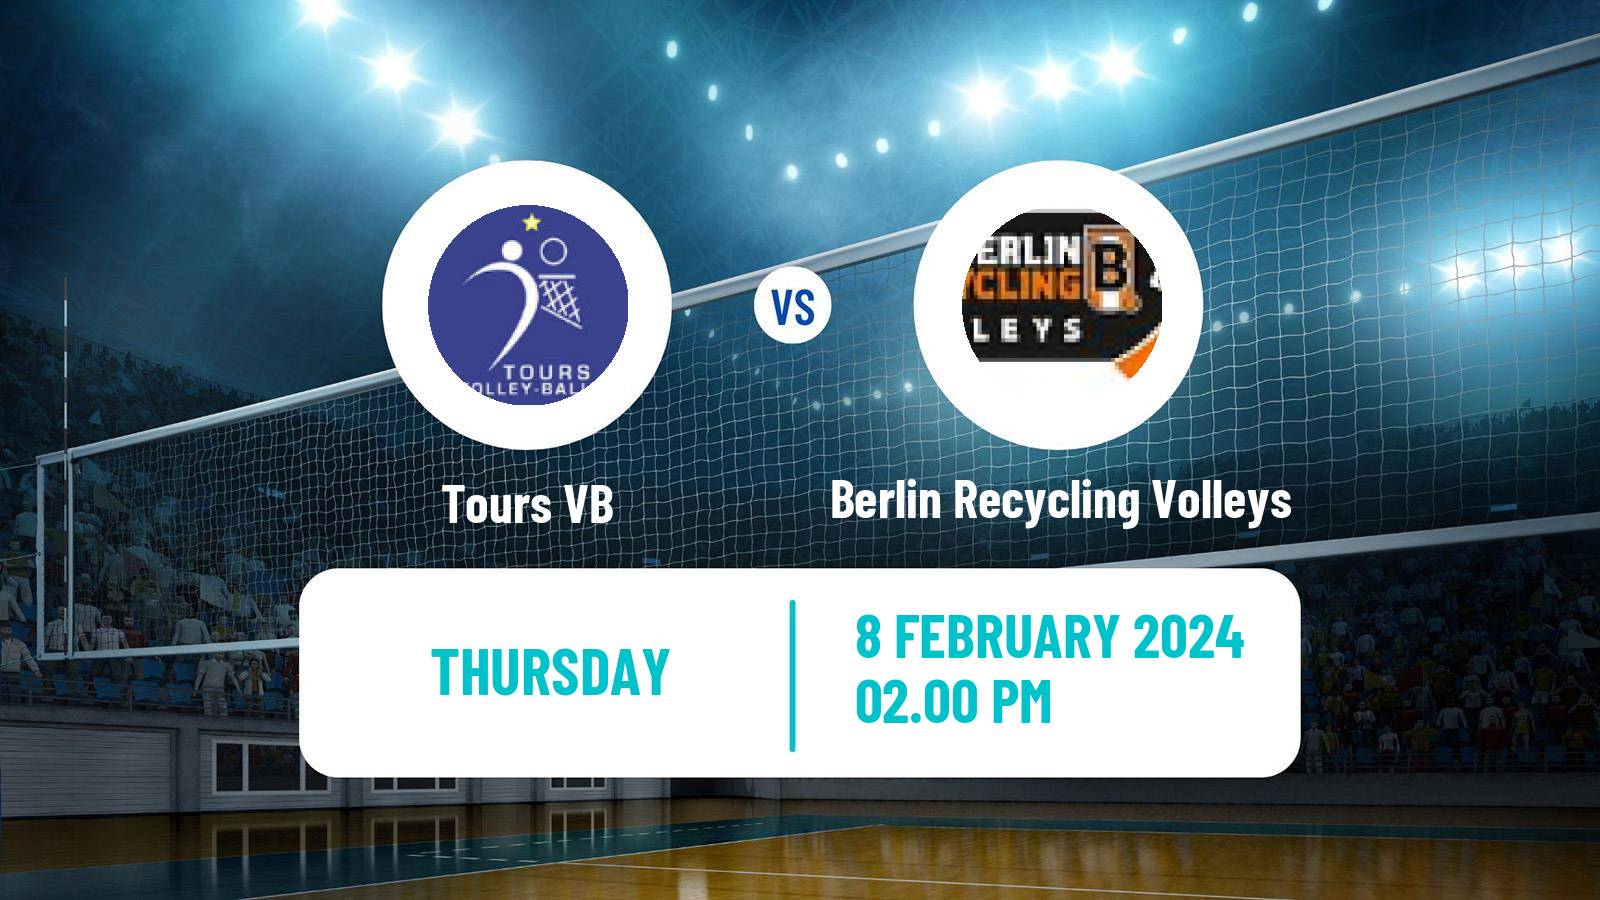 Volleyball CEV Champions League Tours VB - Berlin Recycling Volleys